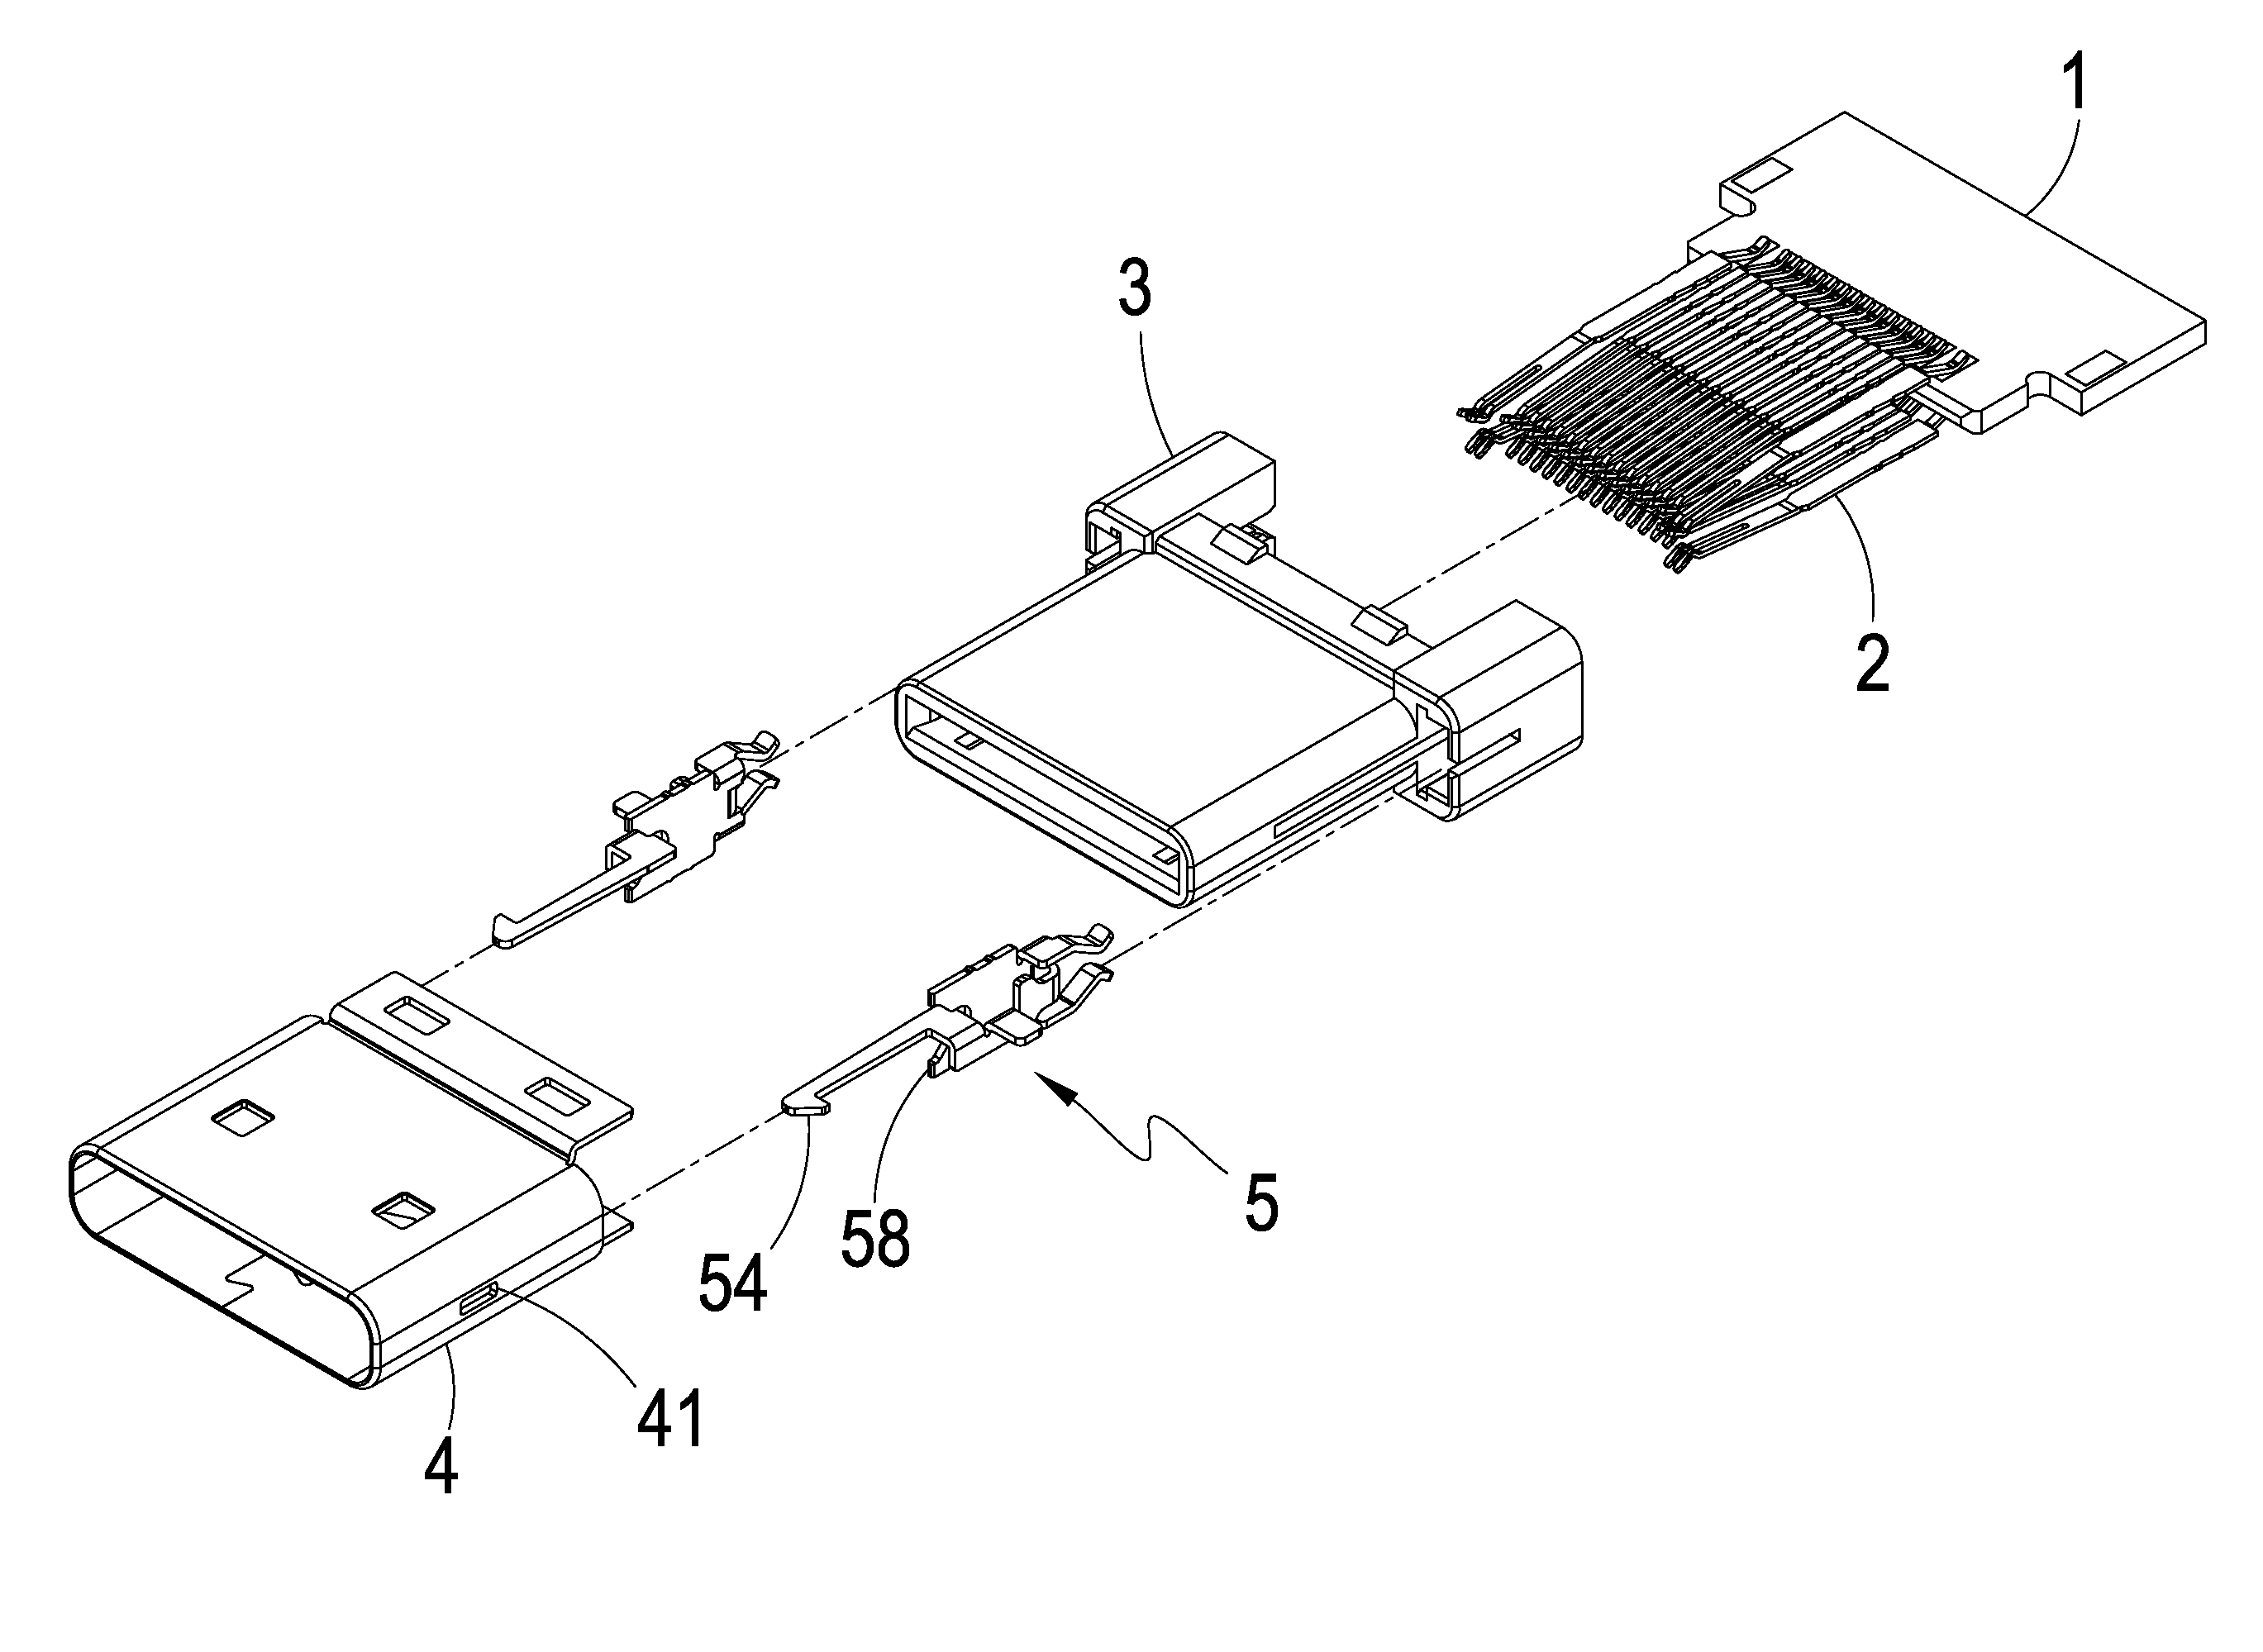 Structure of electrical connector